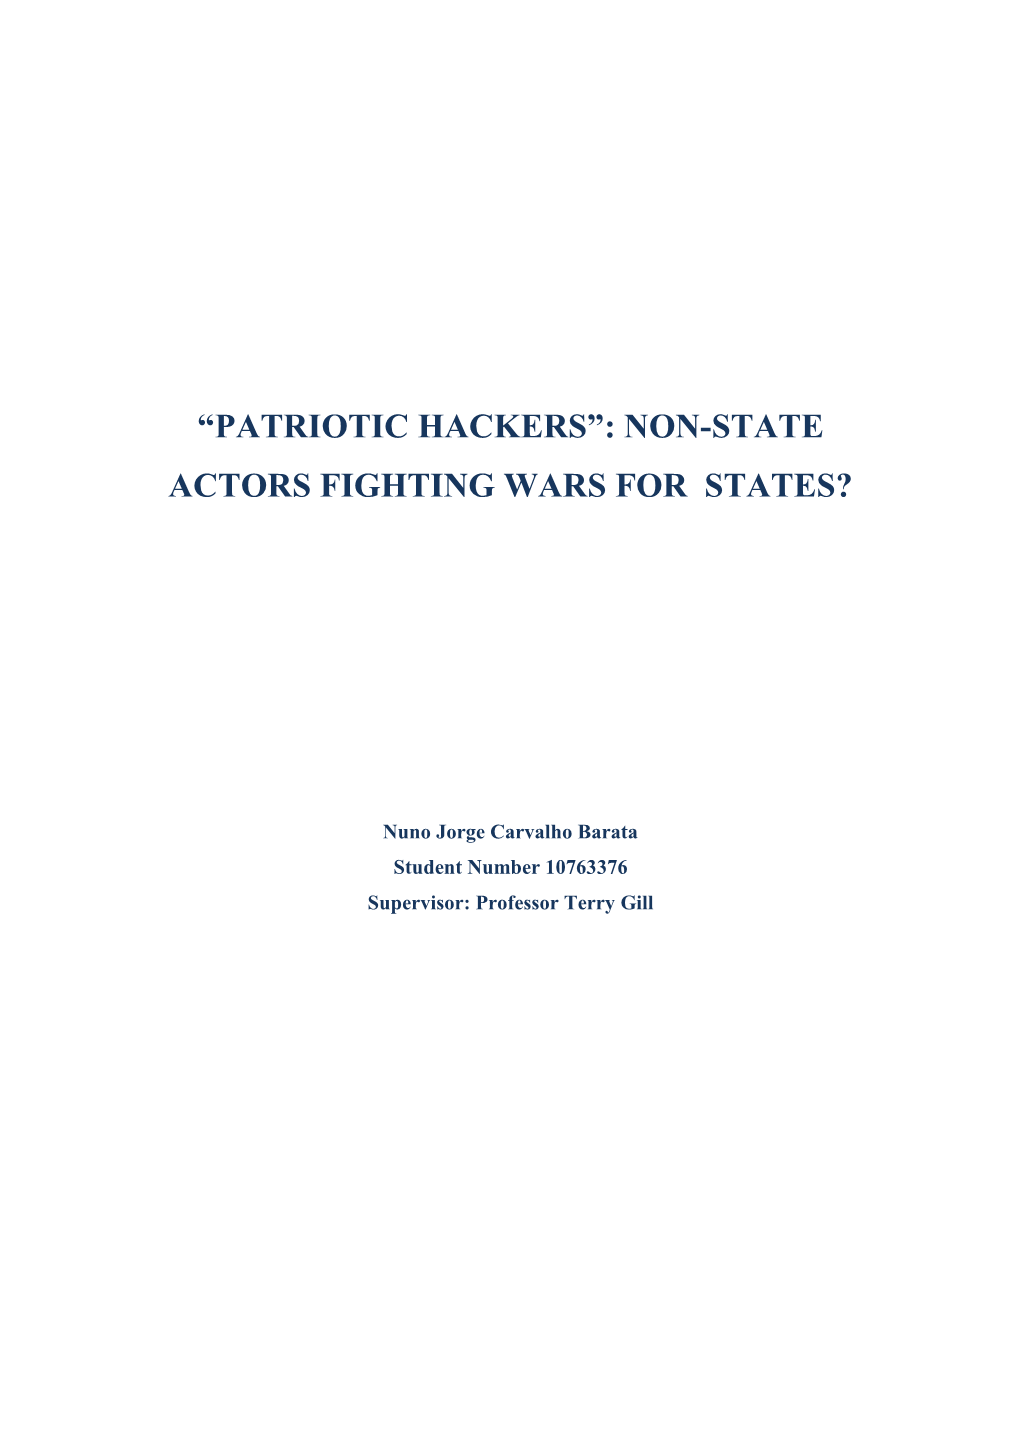 Patriotic Hackers”: Non-State Actors Fighting Wars for States?